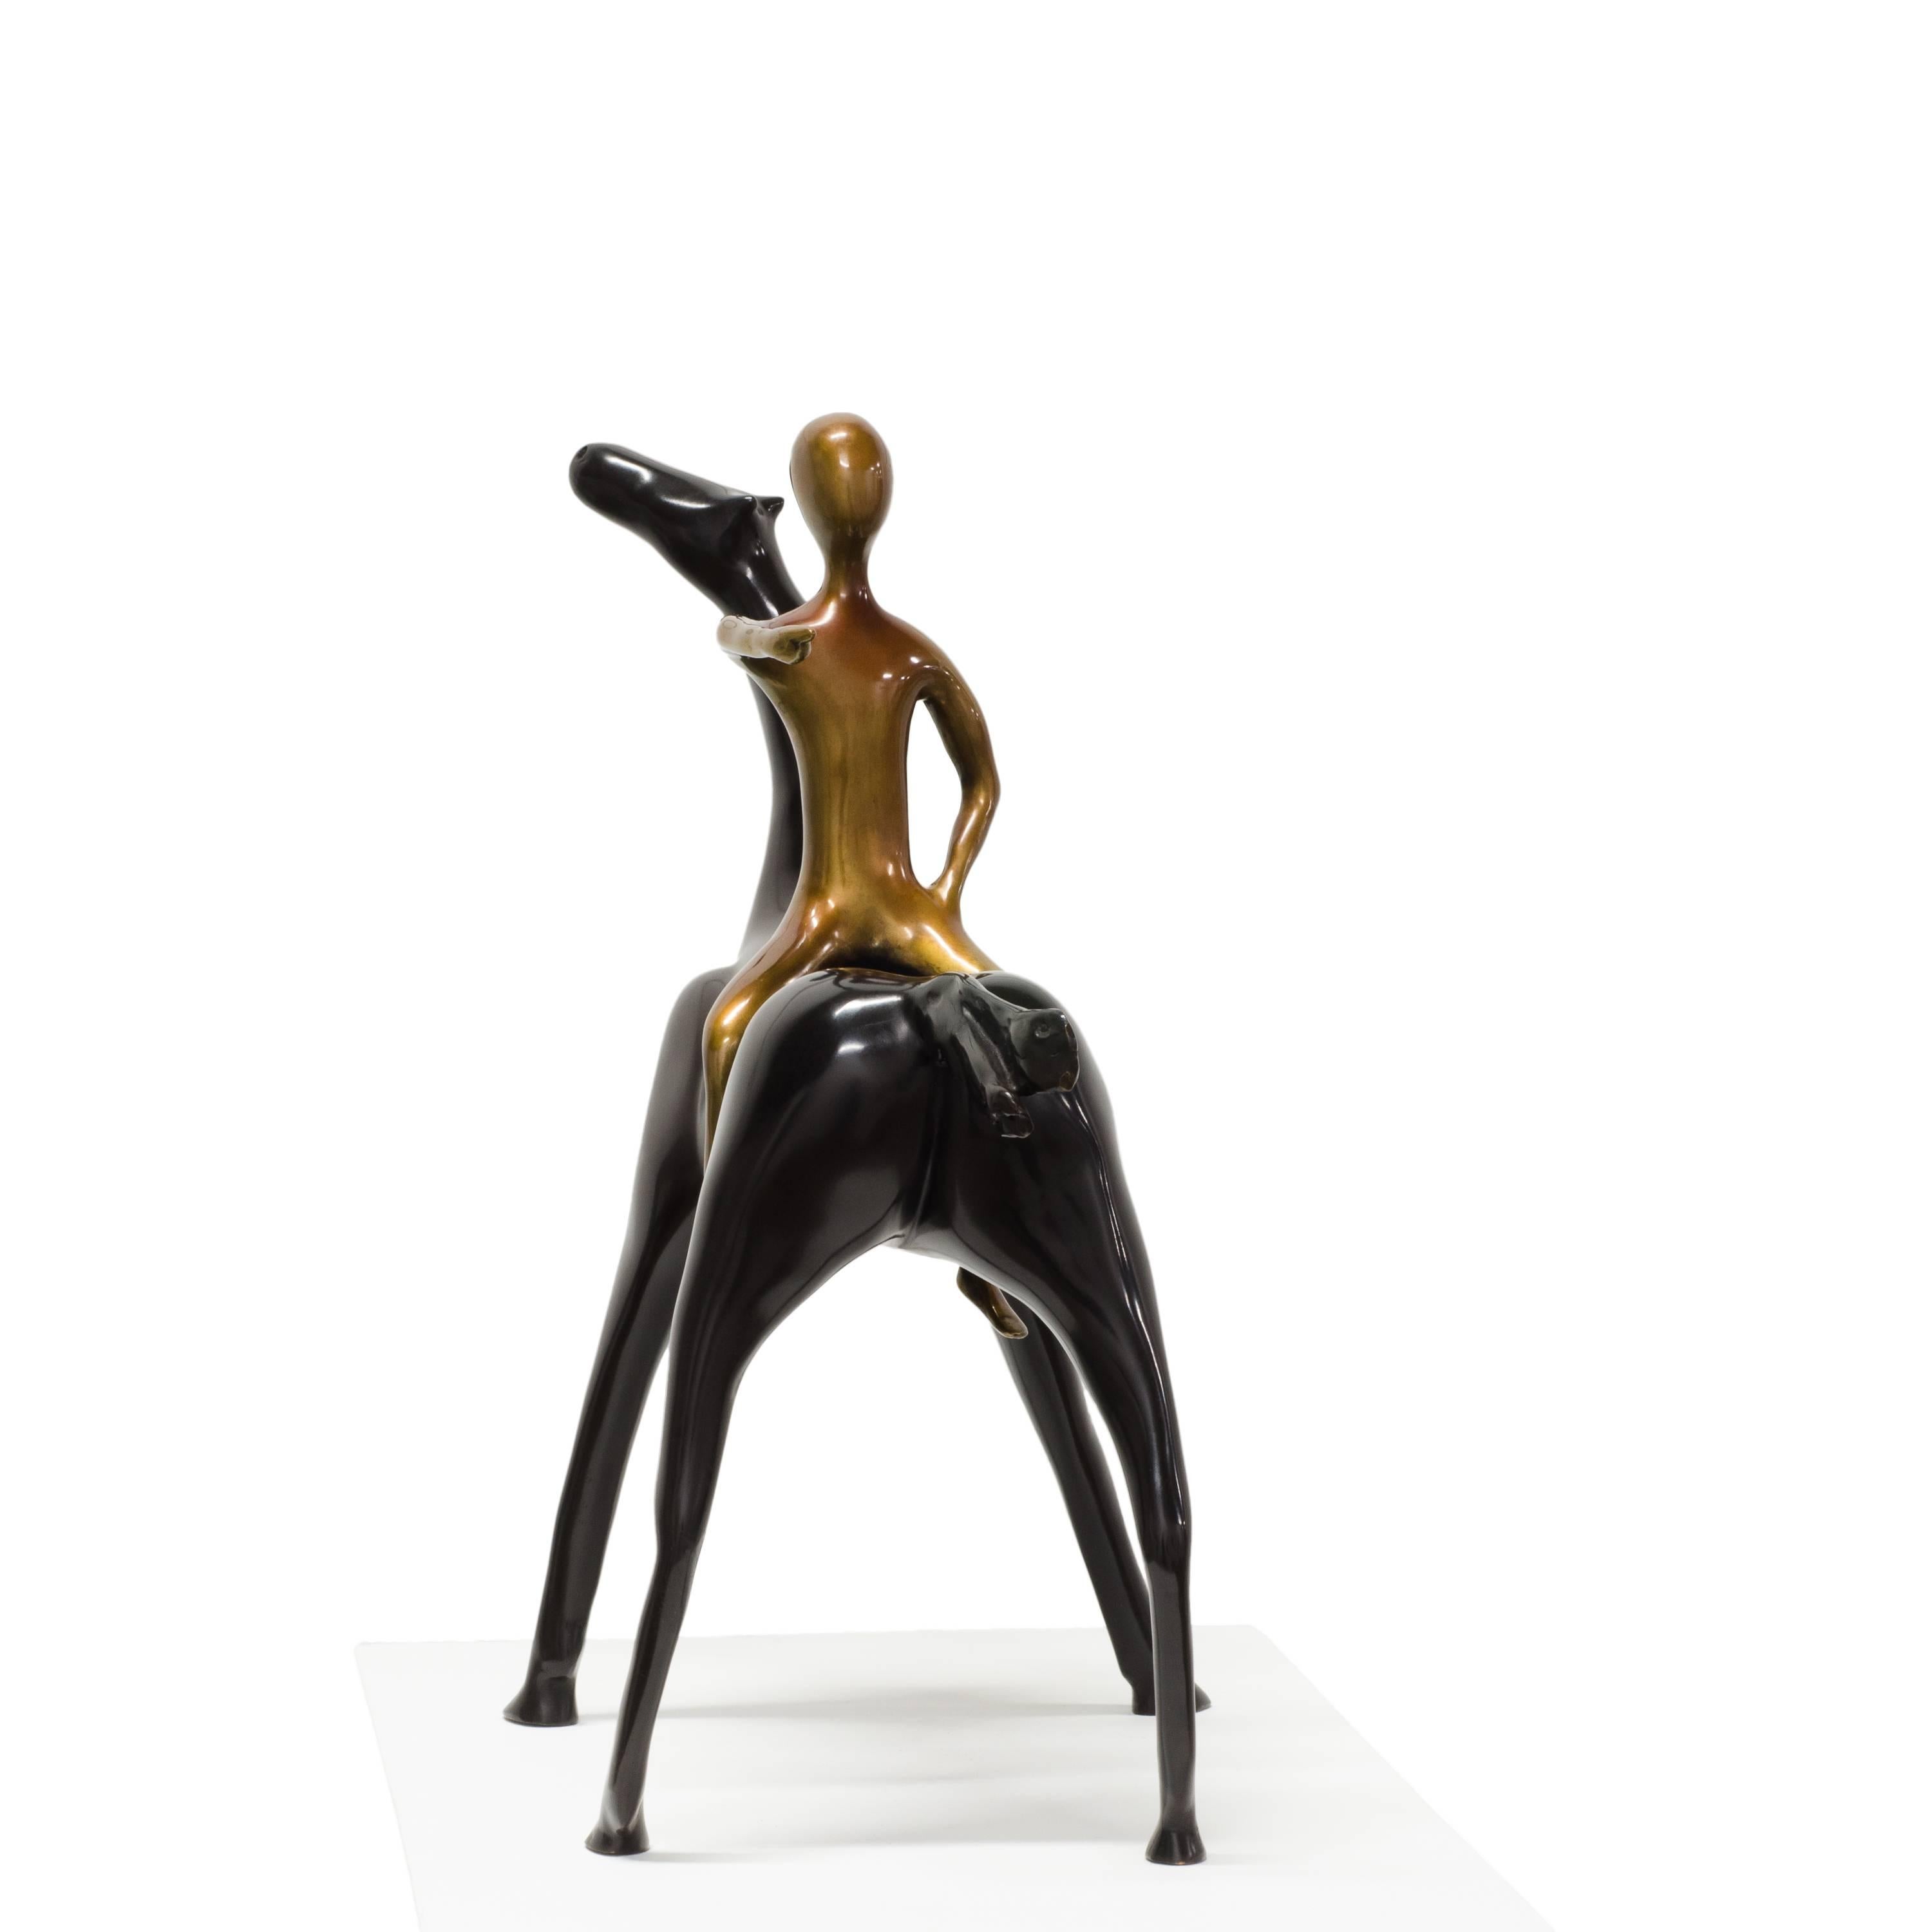 That Way! The disagreement of the horse and the rider. - Gold Abstract Sculpture by Beatriz Gerenstein